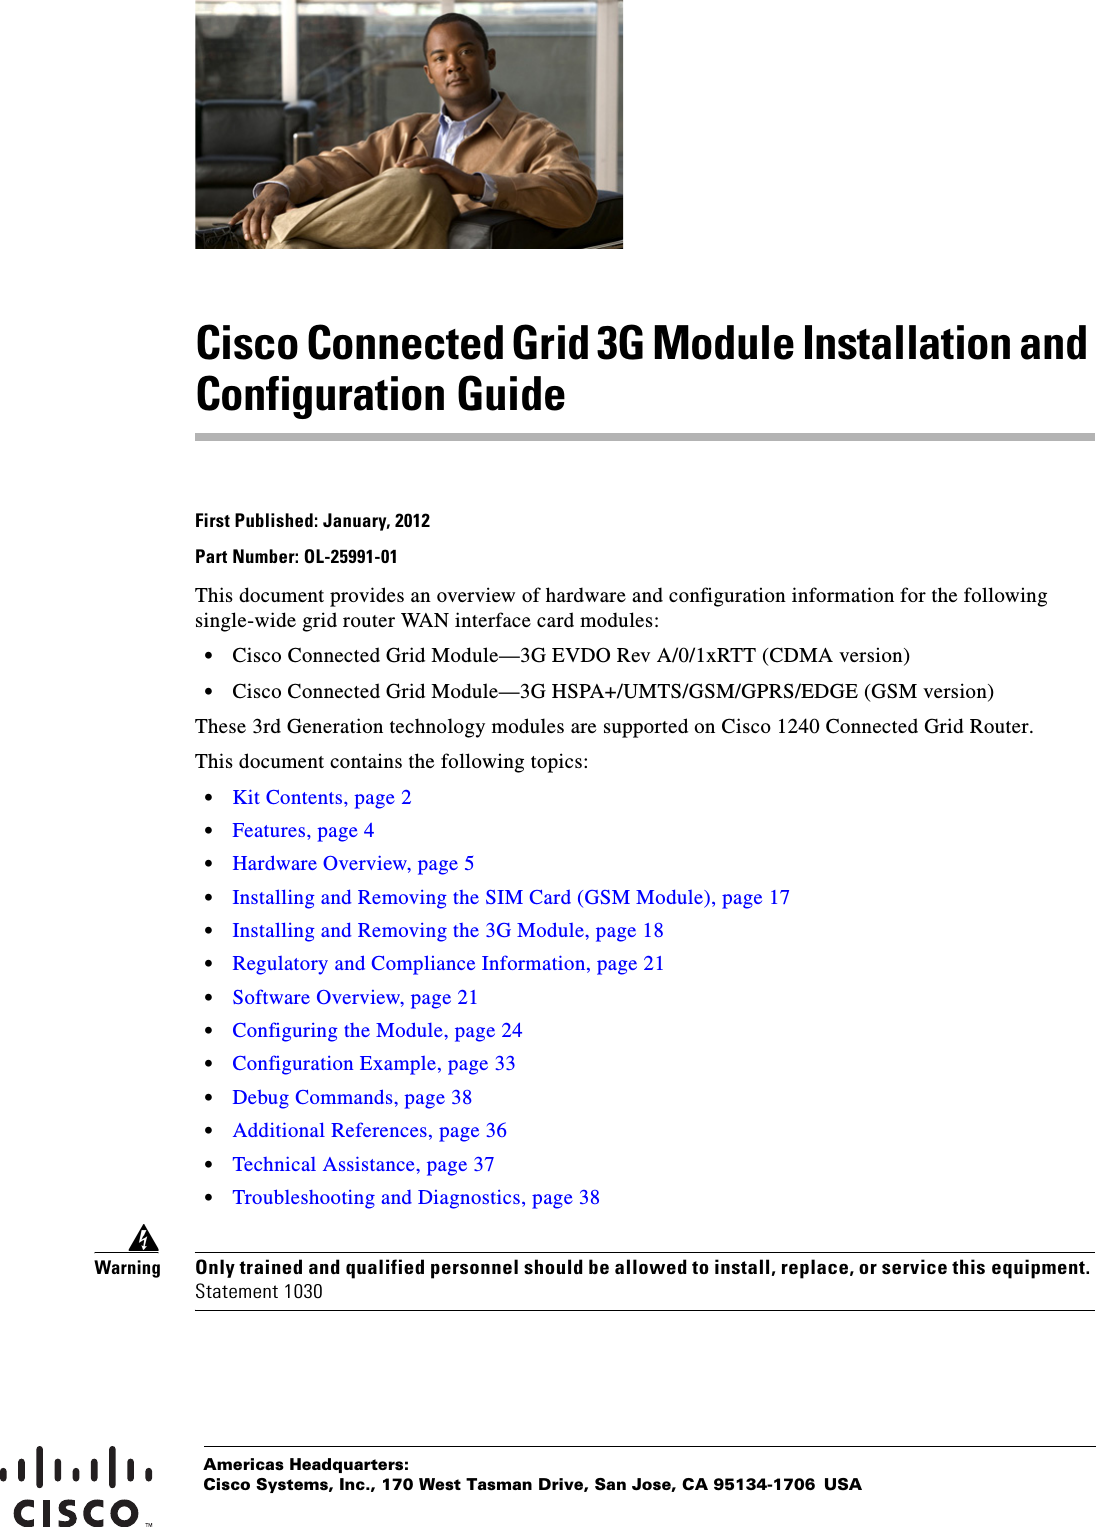 Americas Headquarters:Cisco Systems, Inc., 170 West Tasman Drive, San Jose, CA 95134-1706 USACisco Connected Grid 3G Module Installation and Configuration GuideFirst Published: January, 2012Part Number: OL-25991-01This document provides an overview of hardware and configuration information for the following single-wide grid router WAN interface card modules: • Cisco Connected Grid Module—3G EVDO Rev A/0/1xRTT (CDMA version) • Cisco Connected Grid Module—3G HSPA+/UMTS/GSM/GPRS/EDGE (GSM version)These 3rd Generation technology modules are supported on Cisco 1240 Connected Grid Router.This document contains the following topics: • Kit Contents, page 2 • Features, page 4 • Hardware Overview, page 5 • Installing and Removing the SIM Card (GSM Module), page 17 • Installing and Removing the 3G Module, page 18 • Regulatory and Compliance Information, page 21 • Software Overview, page 21 • Configuring the Module, page 24 • Configuration Example, page 33 • Debug Commands, page 38 • Additional References, page 36 • Technical Assistance, page 37 • Troubleshooting and Diagnostics, page 38WarningOnly trained and qualified personnel should be allowed to install, replace, or service this equipment. Statement 1030